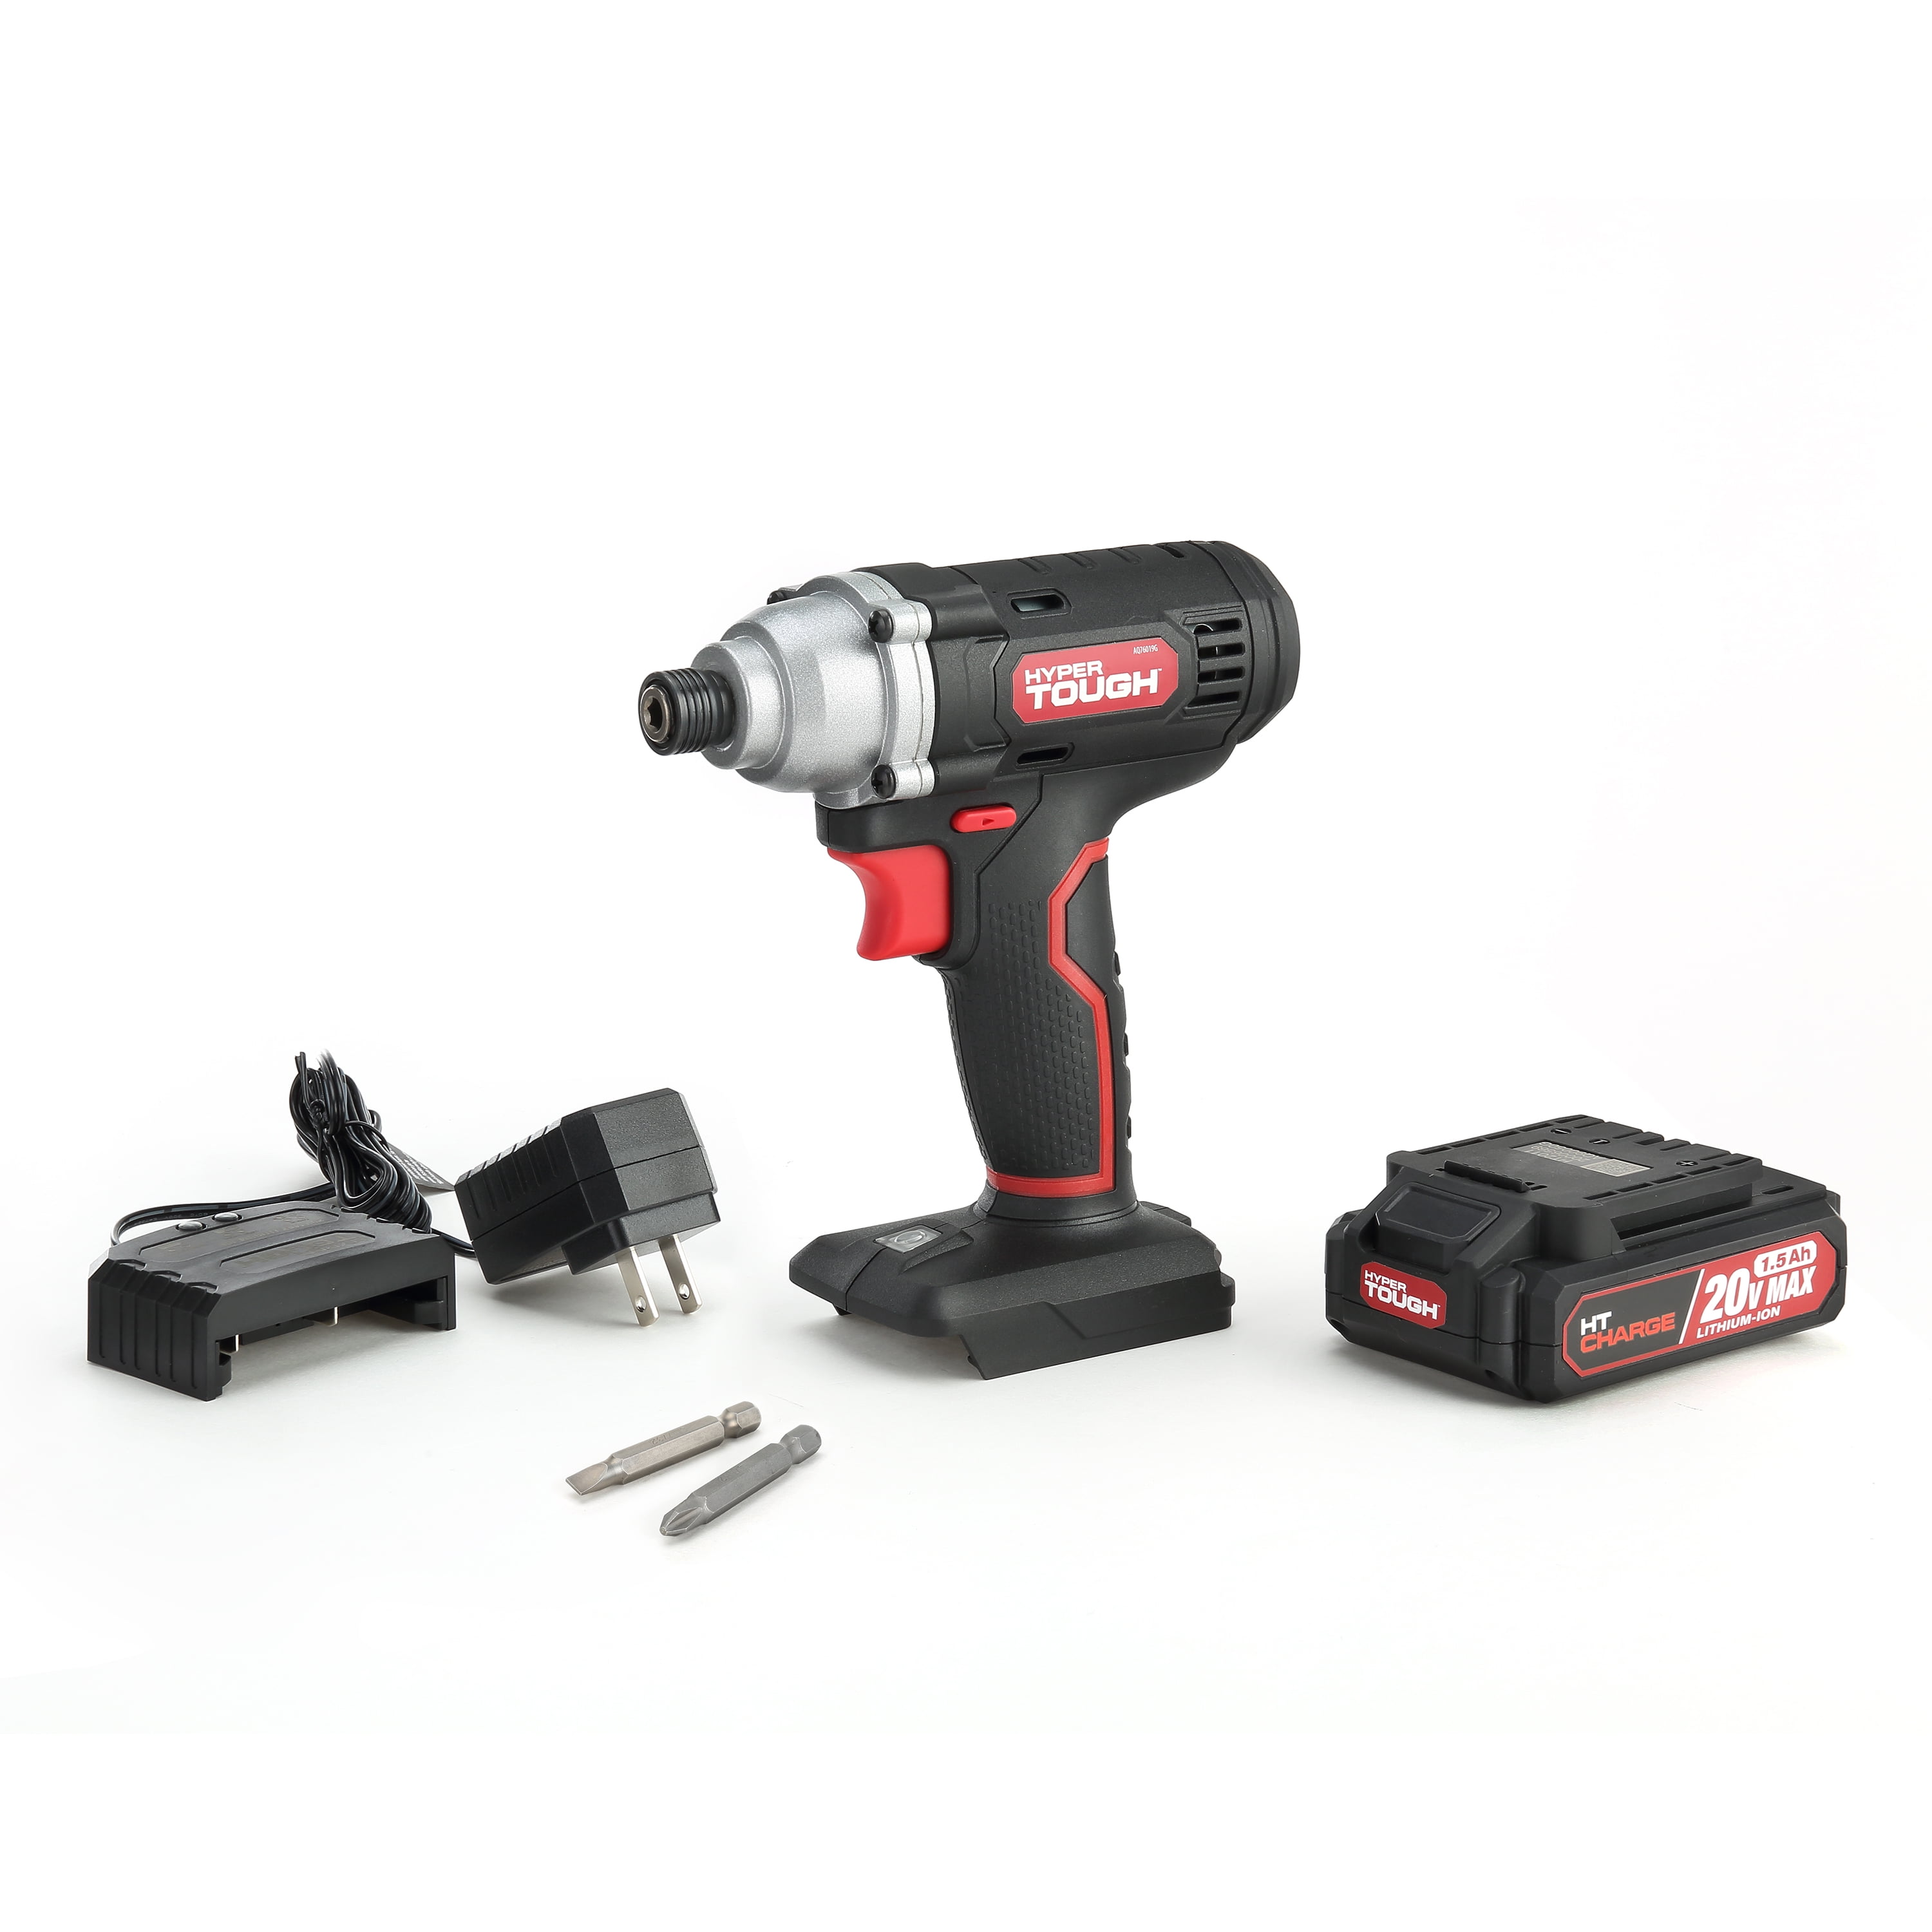 Hyper Tough 20V Max Lithium-Ion Cordless Impact Driver, 1/4 inch Quick Release Chuck with 1.5Ah Lithium-ion Battery & Charger, Bit Holder & LED Light